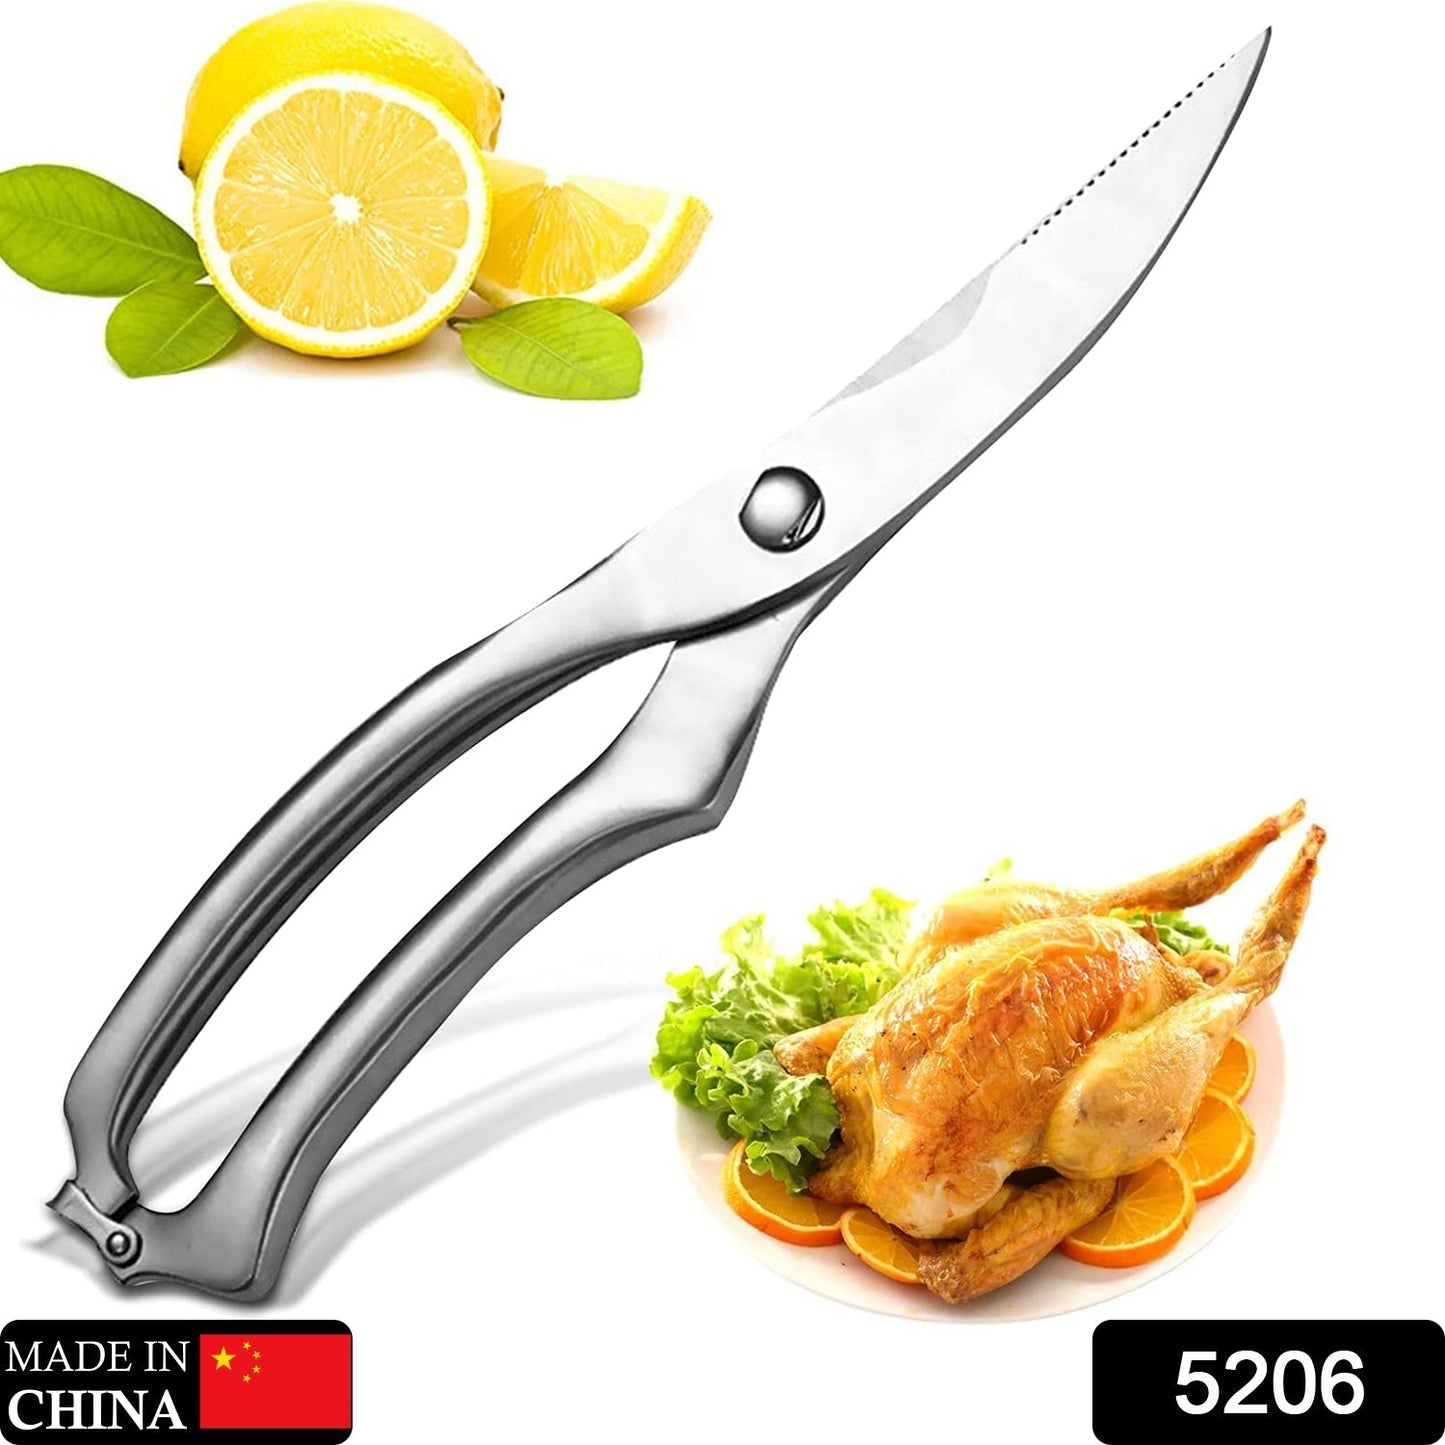 5206 Heavy Duty Stainless Steel Poultry Shears, Premium Ultra Sharp Spring-Loaded Kitchen